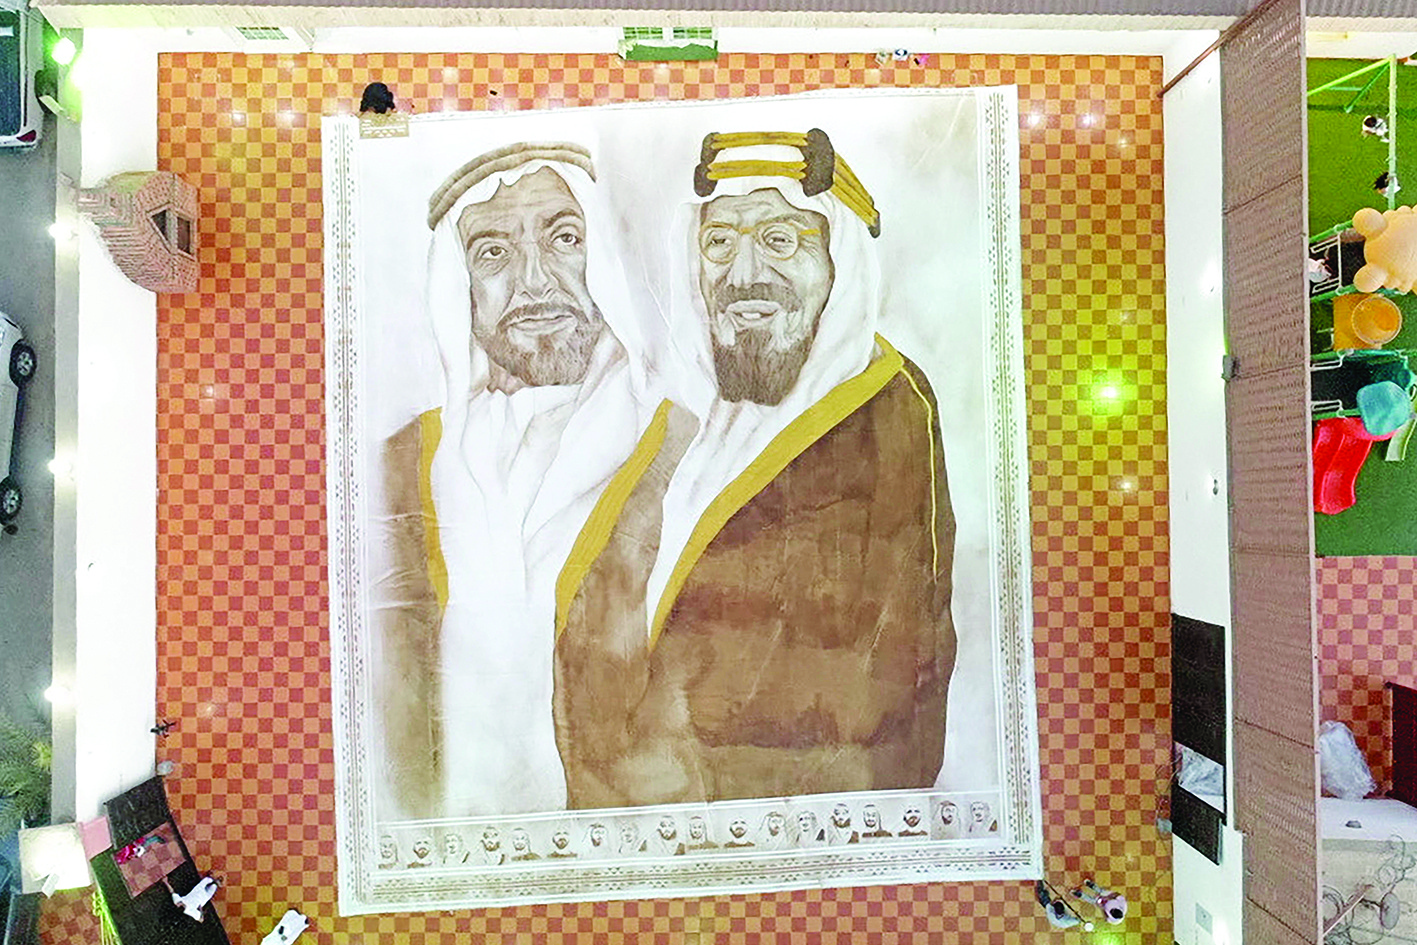 A handout picture released by the Guinness World Records on October 18, 2020 shows the world's largest coffee painting by Saudi artist Ohud Abdullah Almalki depicting founding fathers of Saudi Arabia and the UAE, the late King Abdulaziz bin Abdul Rahman (R) and the late Sheikh Zayed bin Sultan Al Nahyan, in Jeddah. - An artist from Saudi Arabia has created the world's largest coffee painting, the Guinness World Records announced today, making her the first Saudi woman to achieve a records title singlehandedly. The painting, called Naseej 1, is spread over 220 square meters in the city of Jeddah and is made out of seven connected cloths with approximately 4.5 kilogrammes of expired coffee powder. (Photo by - / Guinness World Records / AFP) / RESTRICTED TO EDITORIAL USE - MANDATORY CREDIT AFP PHOTO /GUINESS WORLD RECORDS - NO MARKETING NO ADVERTISING CAMPAIGNS -DISTRIBUTED AS A SERVICE TO CLIENTS